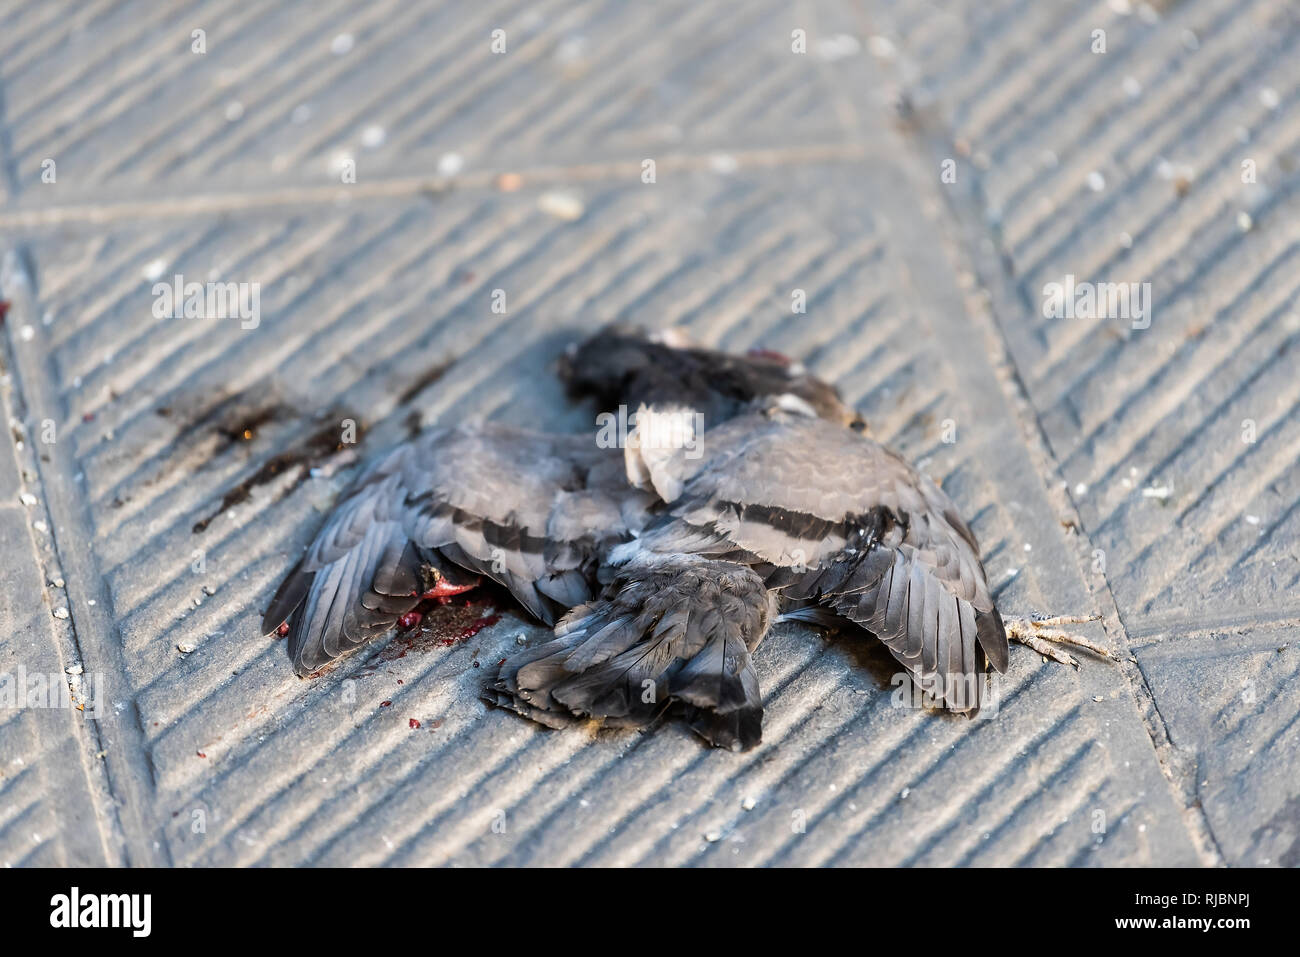 Closeup of dead blue pigeon bird with guts and blood after being run over by car on summer street in Siena, Italy Stock Photo